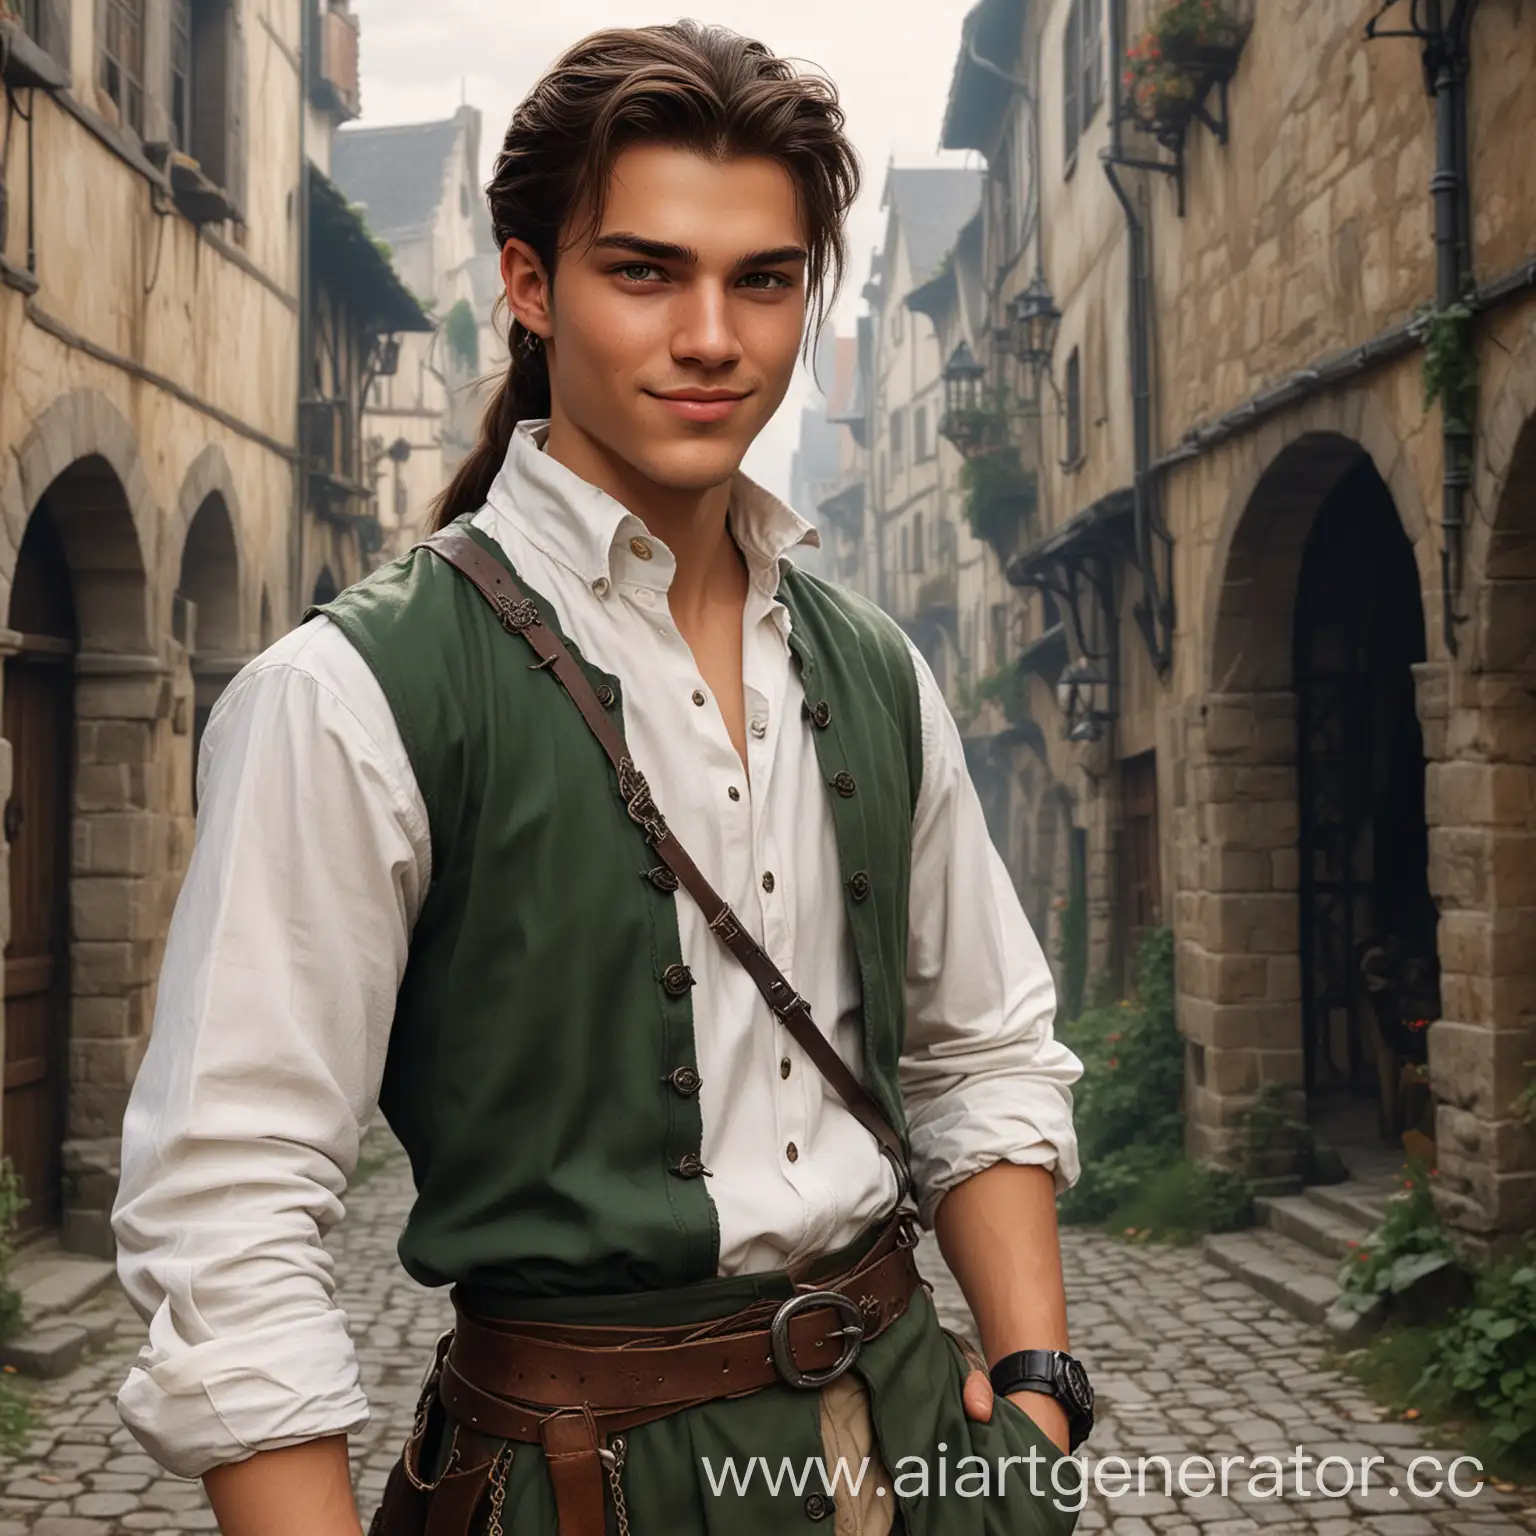 A 17-year-old guy with dark hair gathered in a lower ponytail, dressed in a white shirt, dark pants and high boots, green-brown eyes, a smug smile on his face, a watch on a chain in his hands (this is a character for DND in the setting of the medieval fantasy of Europe)